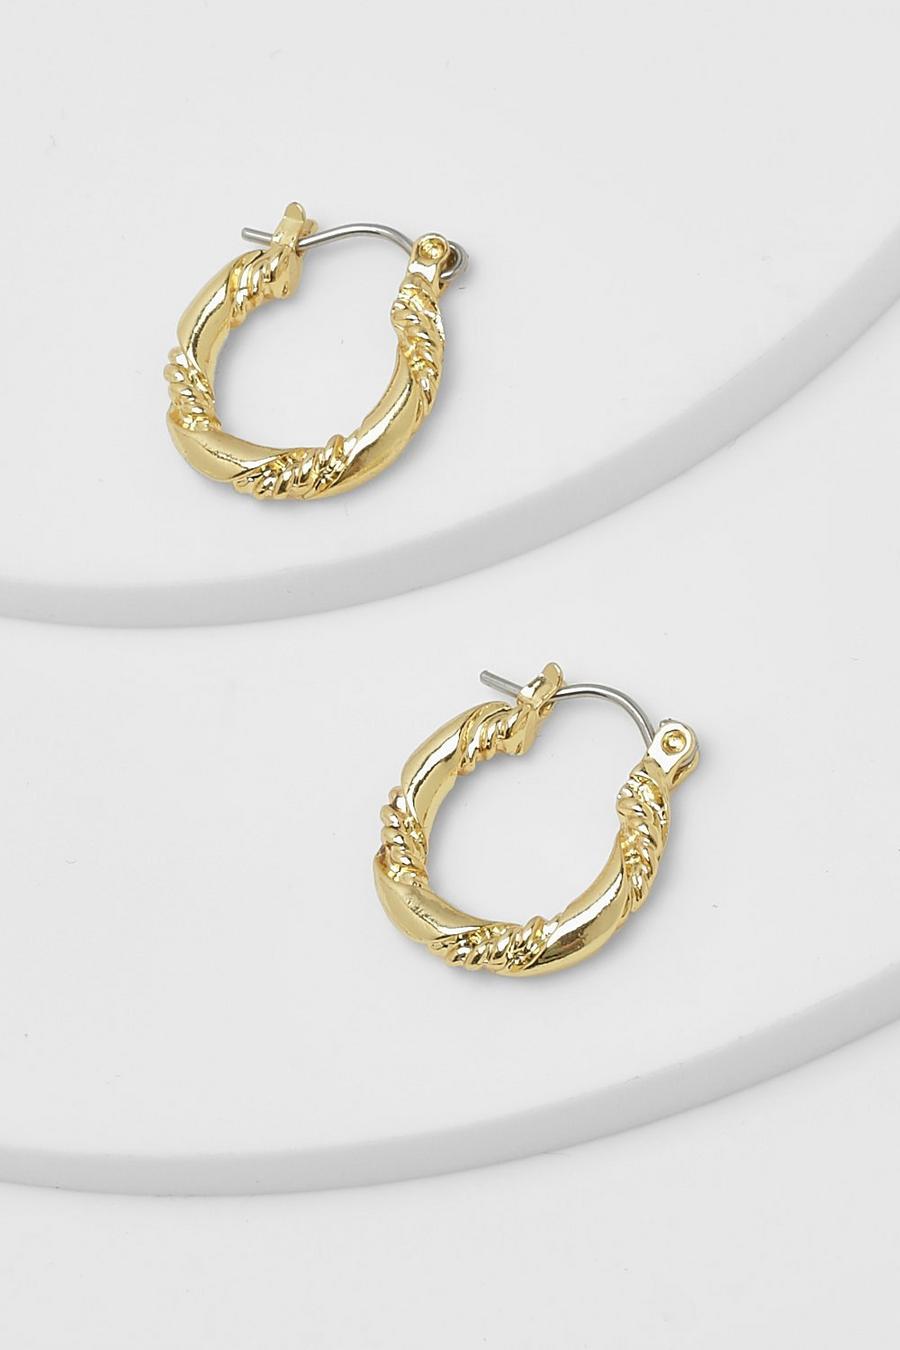 Real Gold Plated Twisted Knot Earrings 